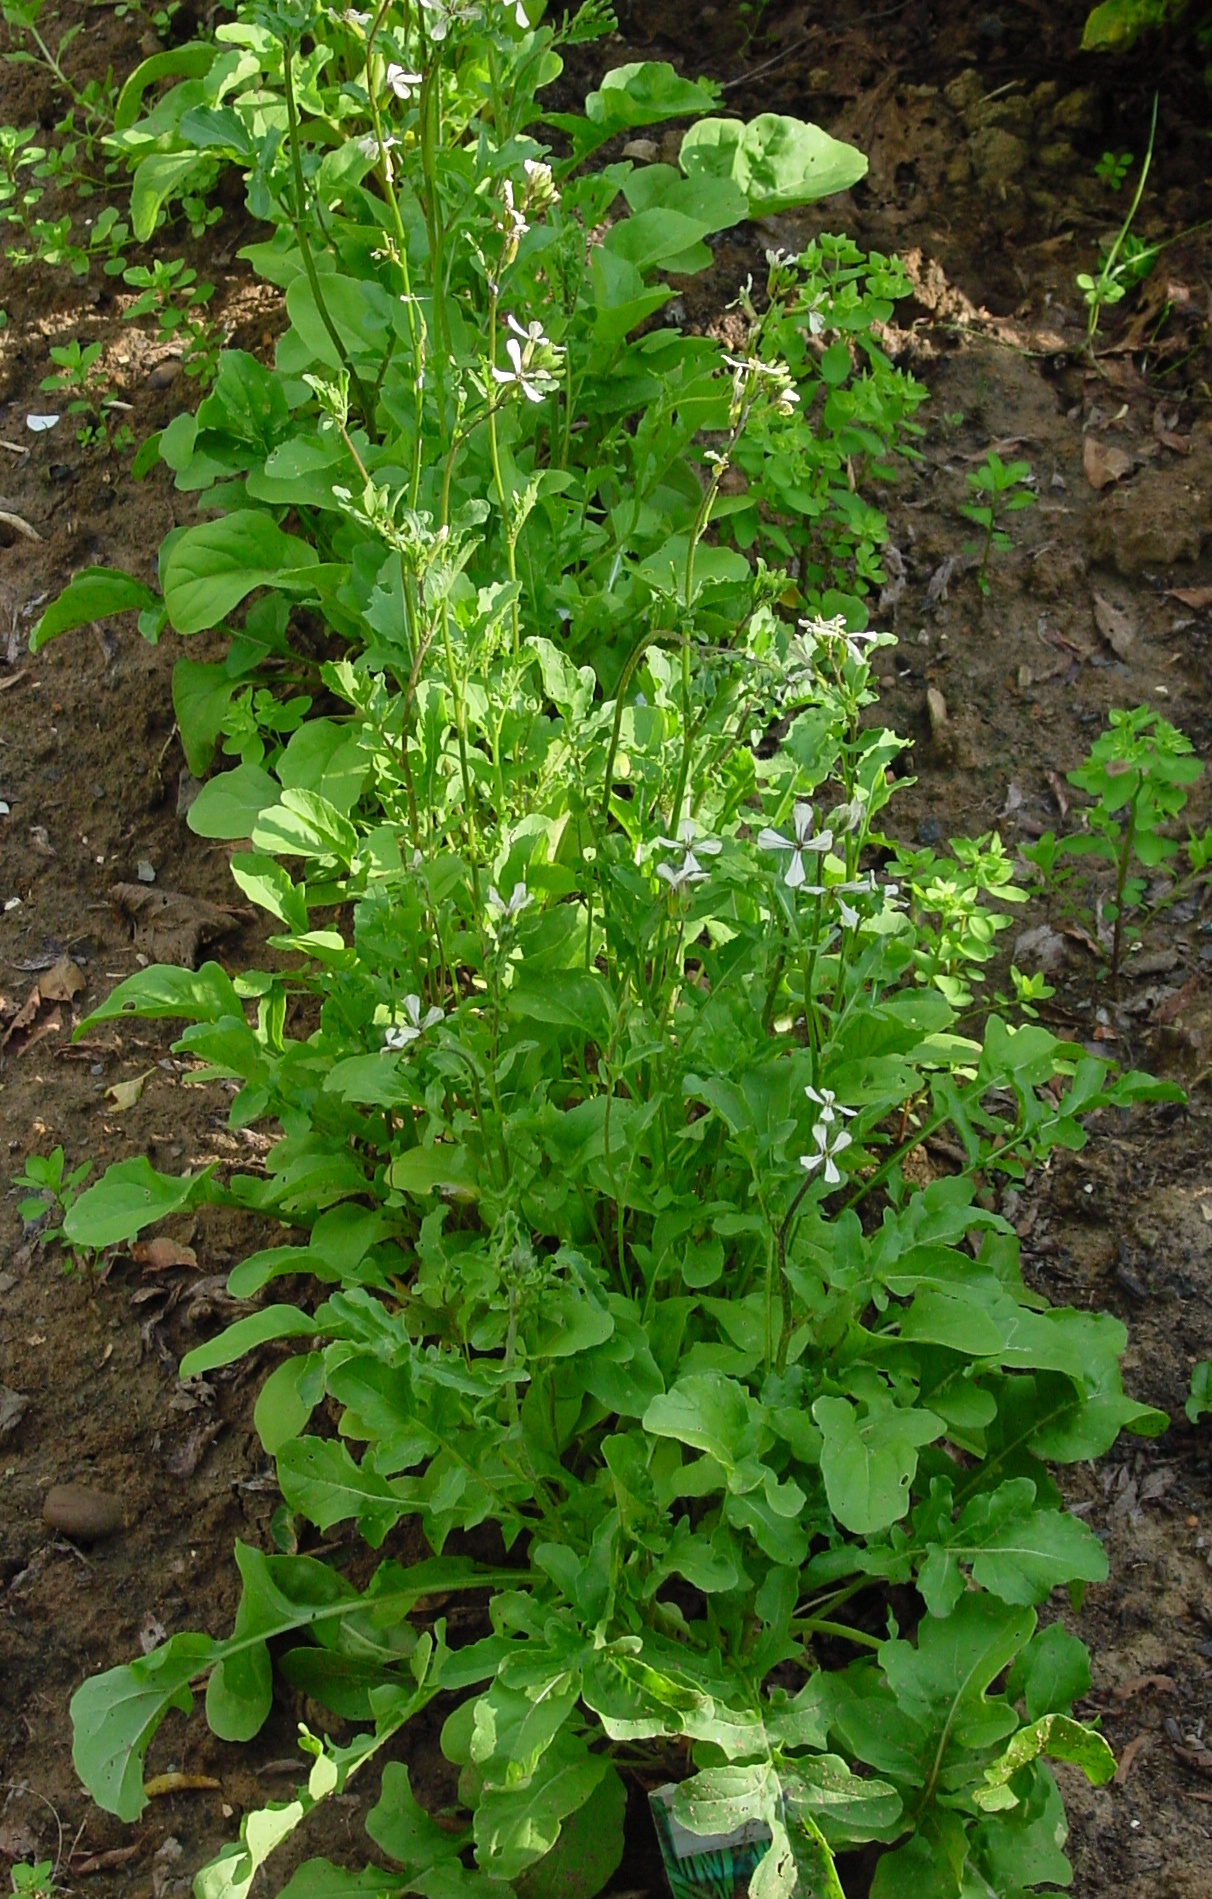 arugula is delicious in salads and has many health benefits.  image courtesy of Leo Michels